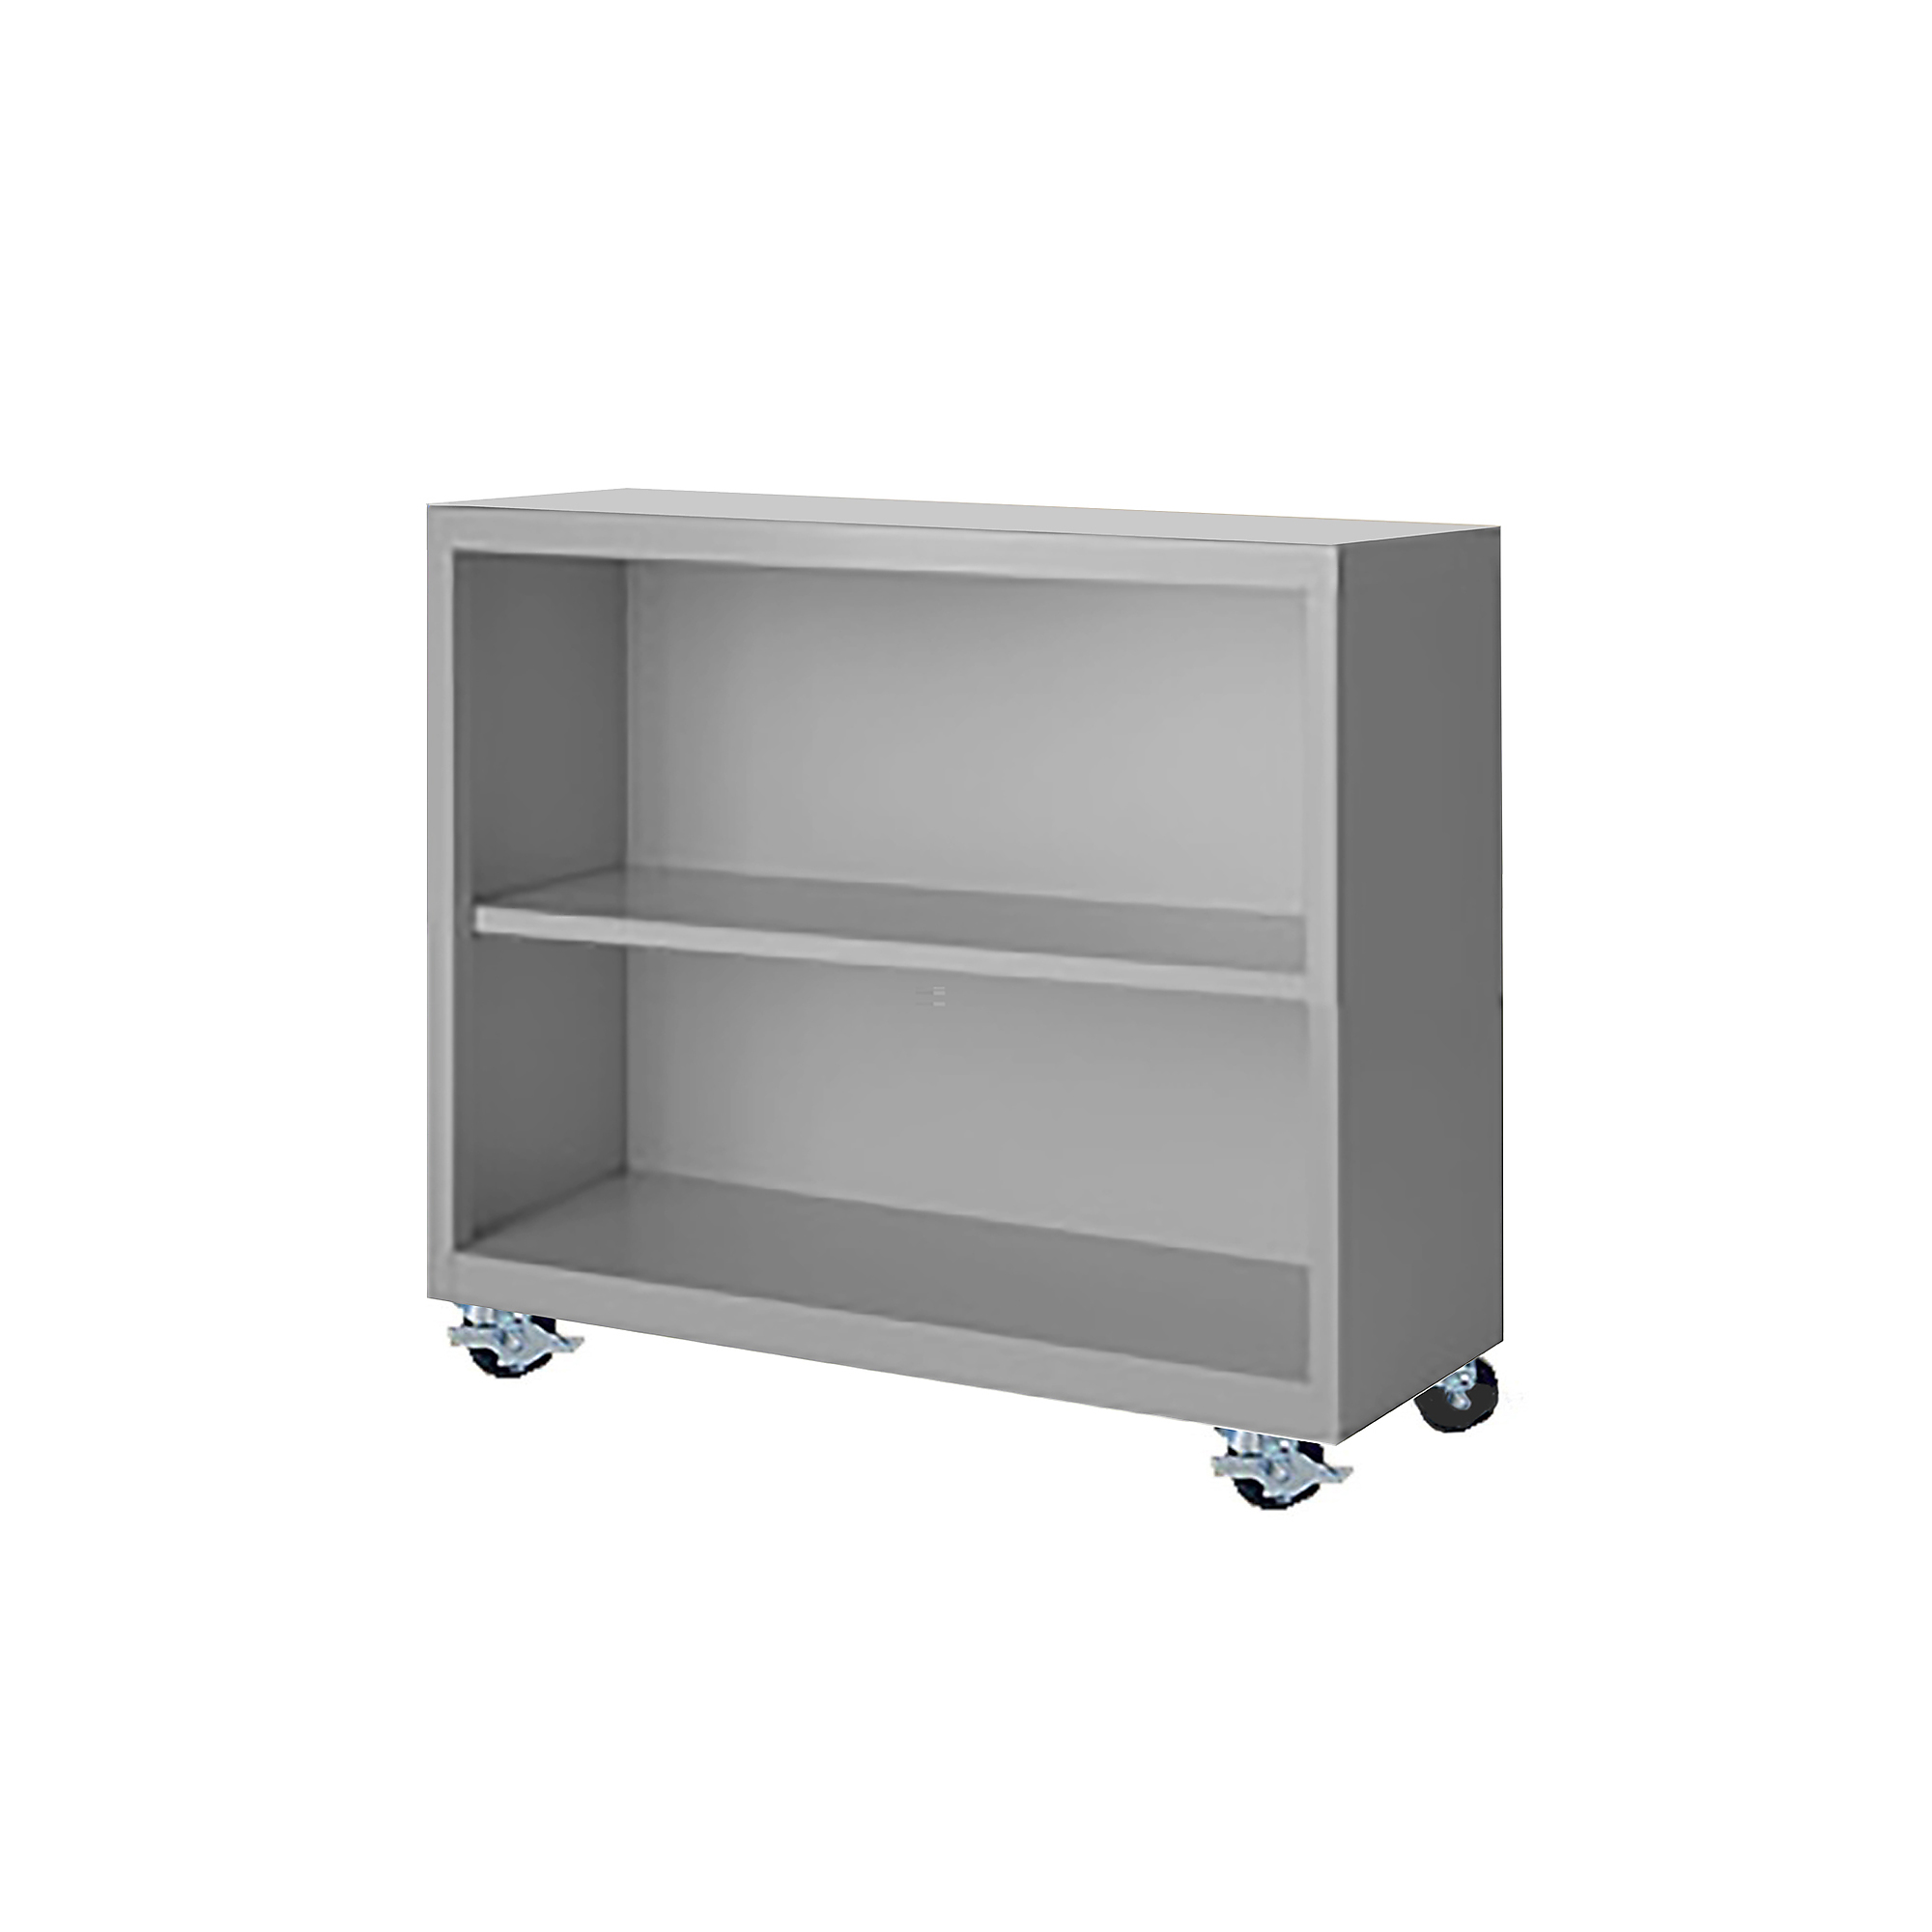 Steel Cabinets USA, 36Inchx18Inchx33Inch Gray Mobile Bookcase Fully Assembled, Height 33 in, Shelves (qty.) 2, Material Steel, Model MBCA-363318-G